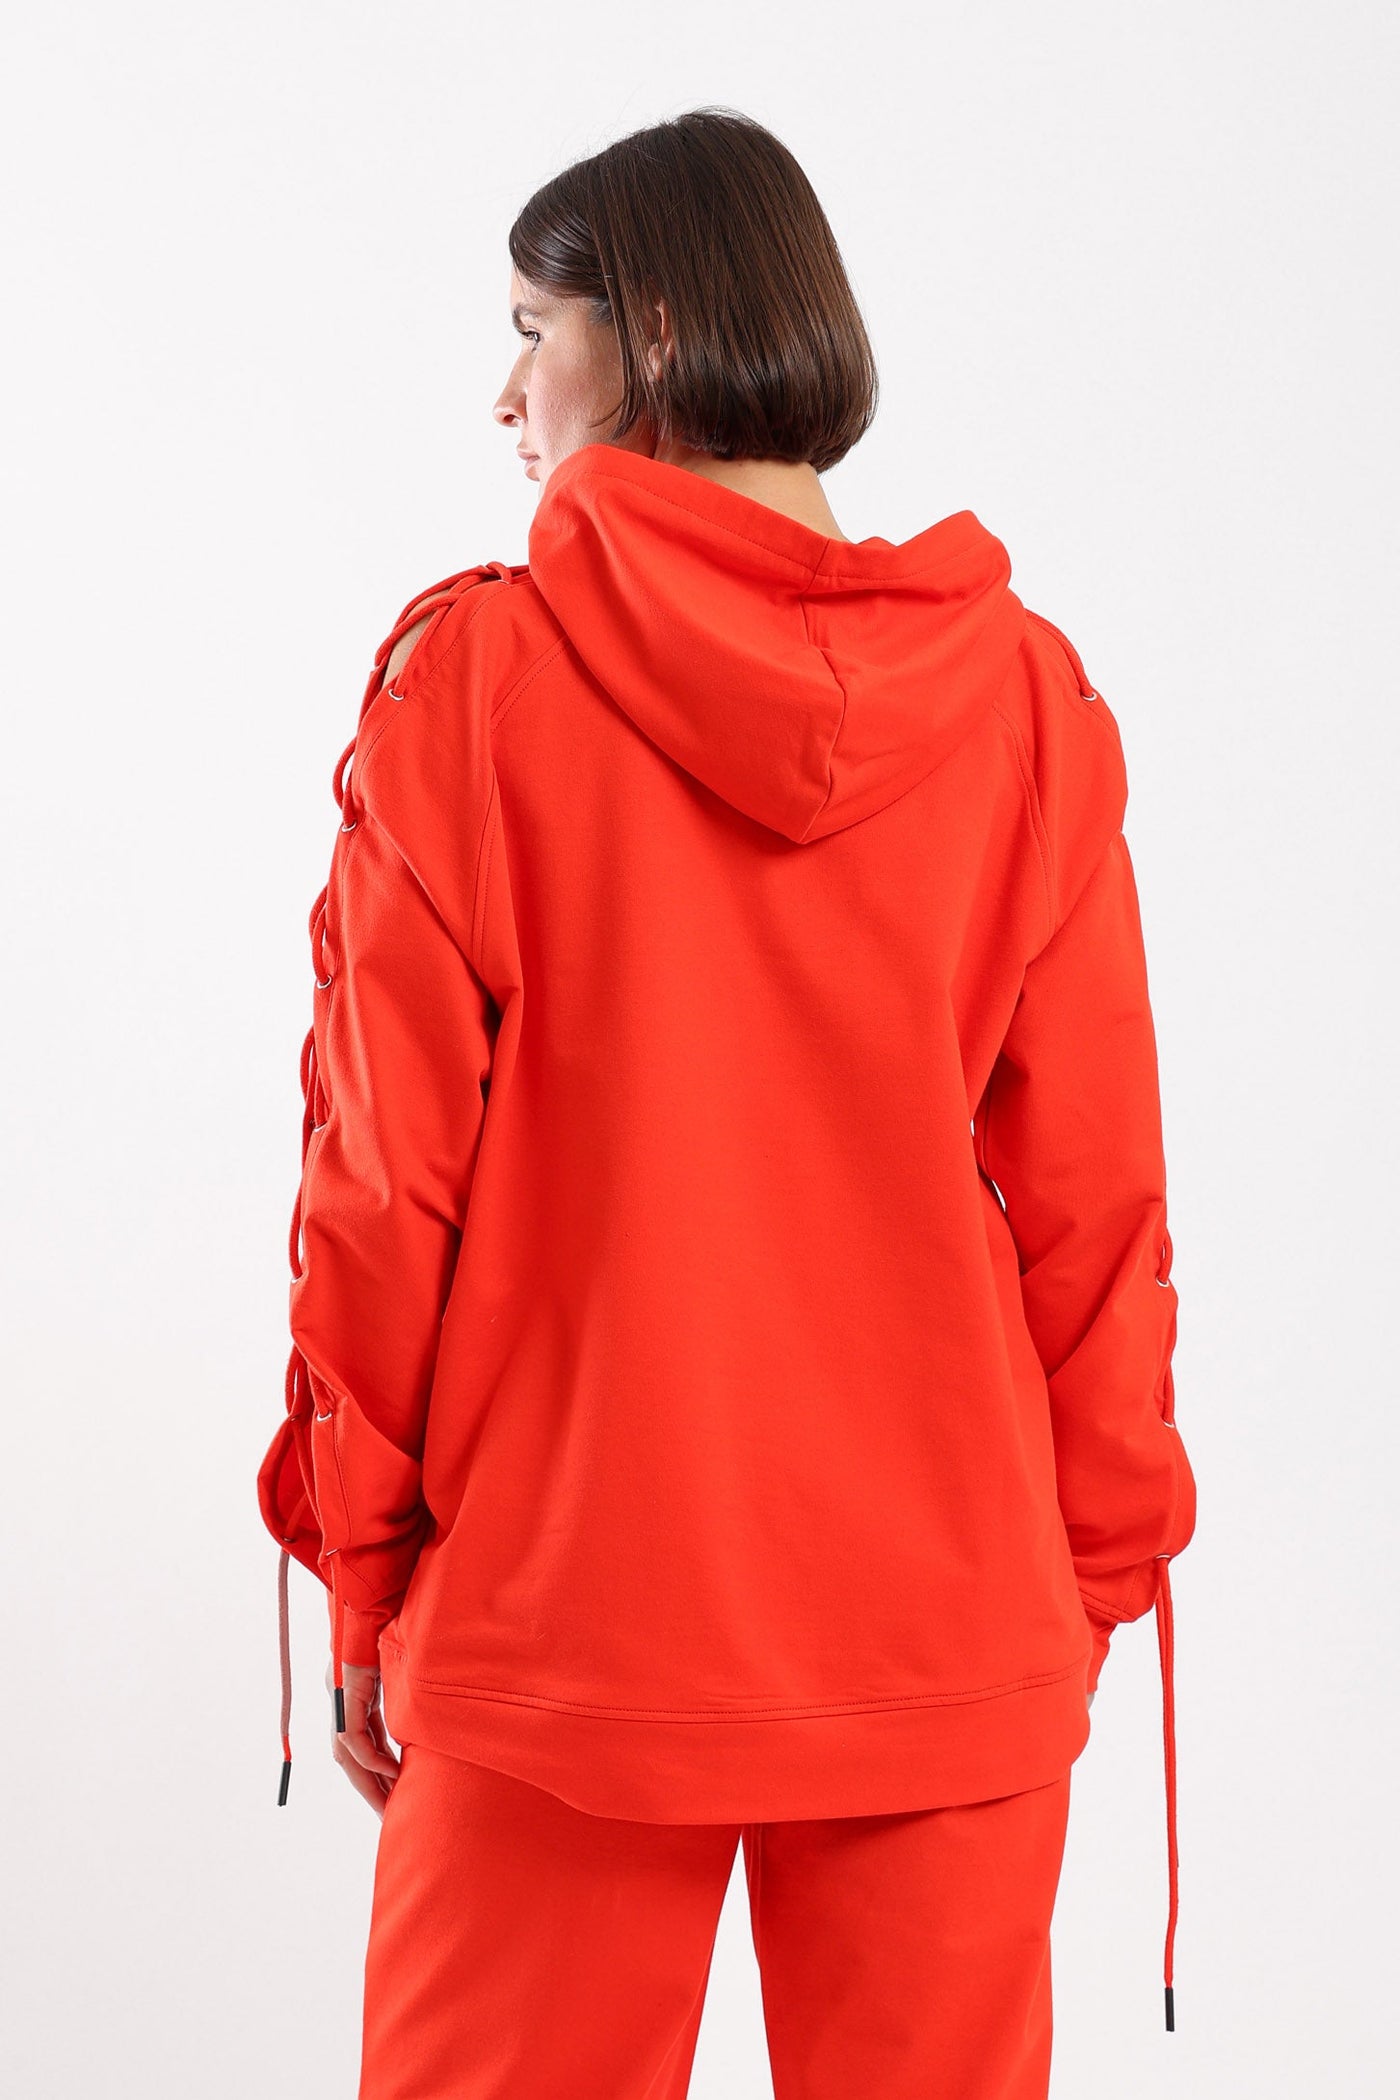 EDGY LACE-UP COMFORT HOODIE - RED